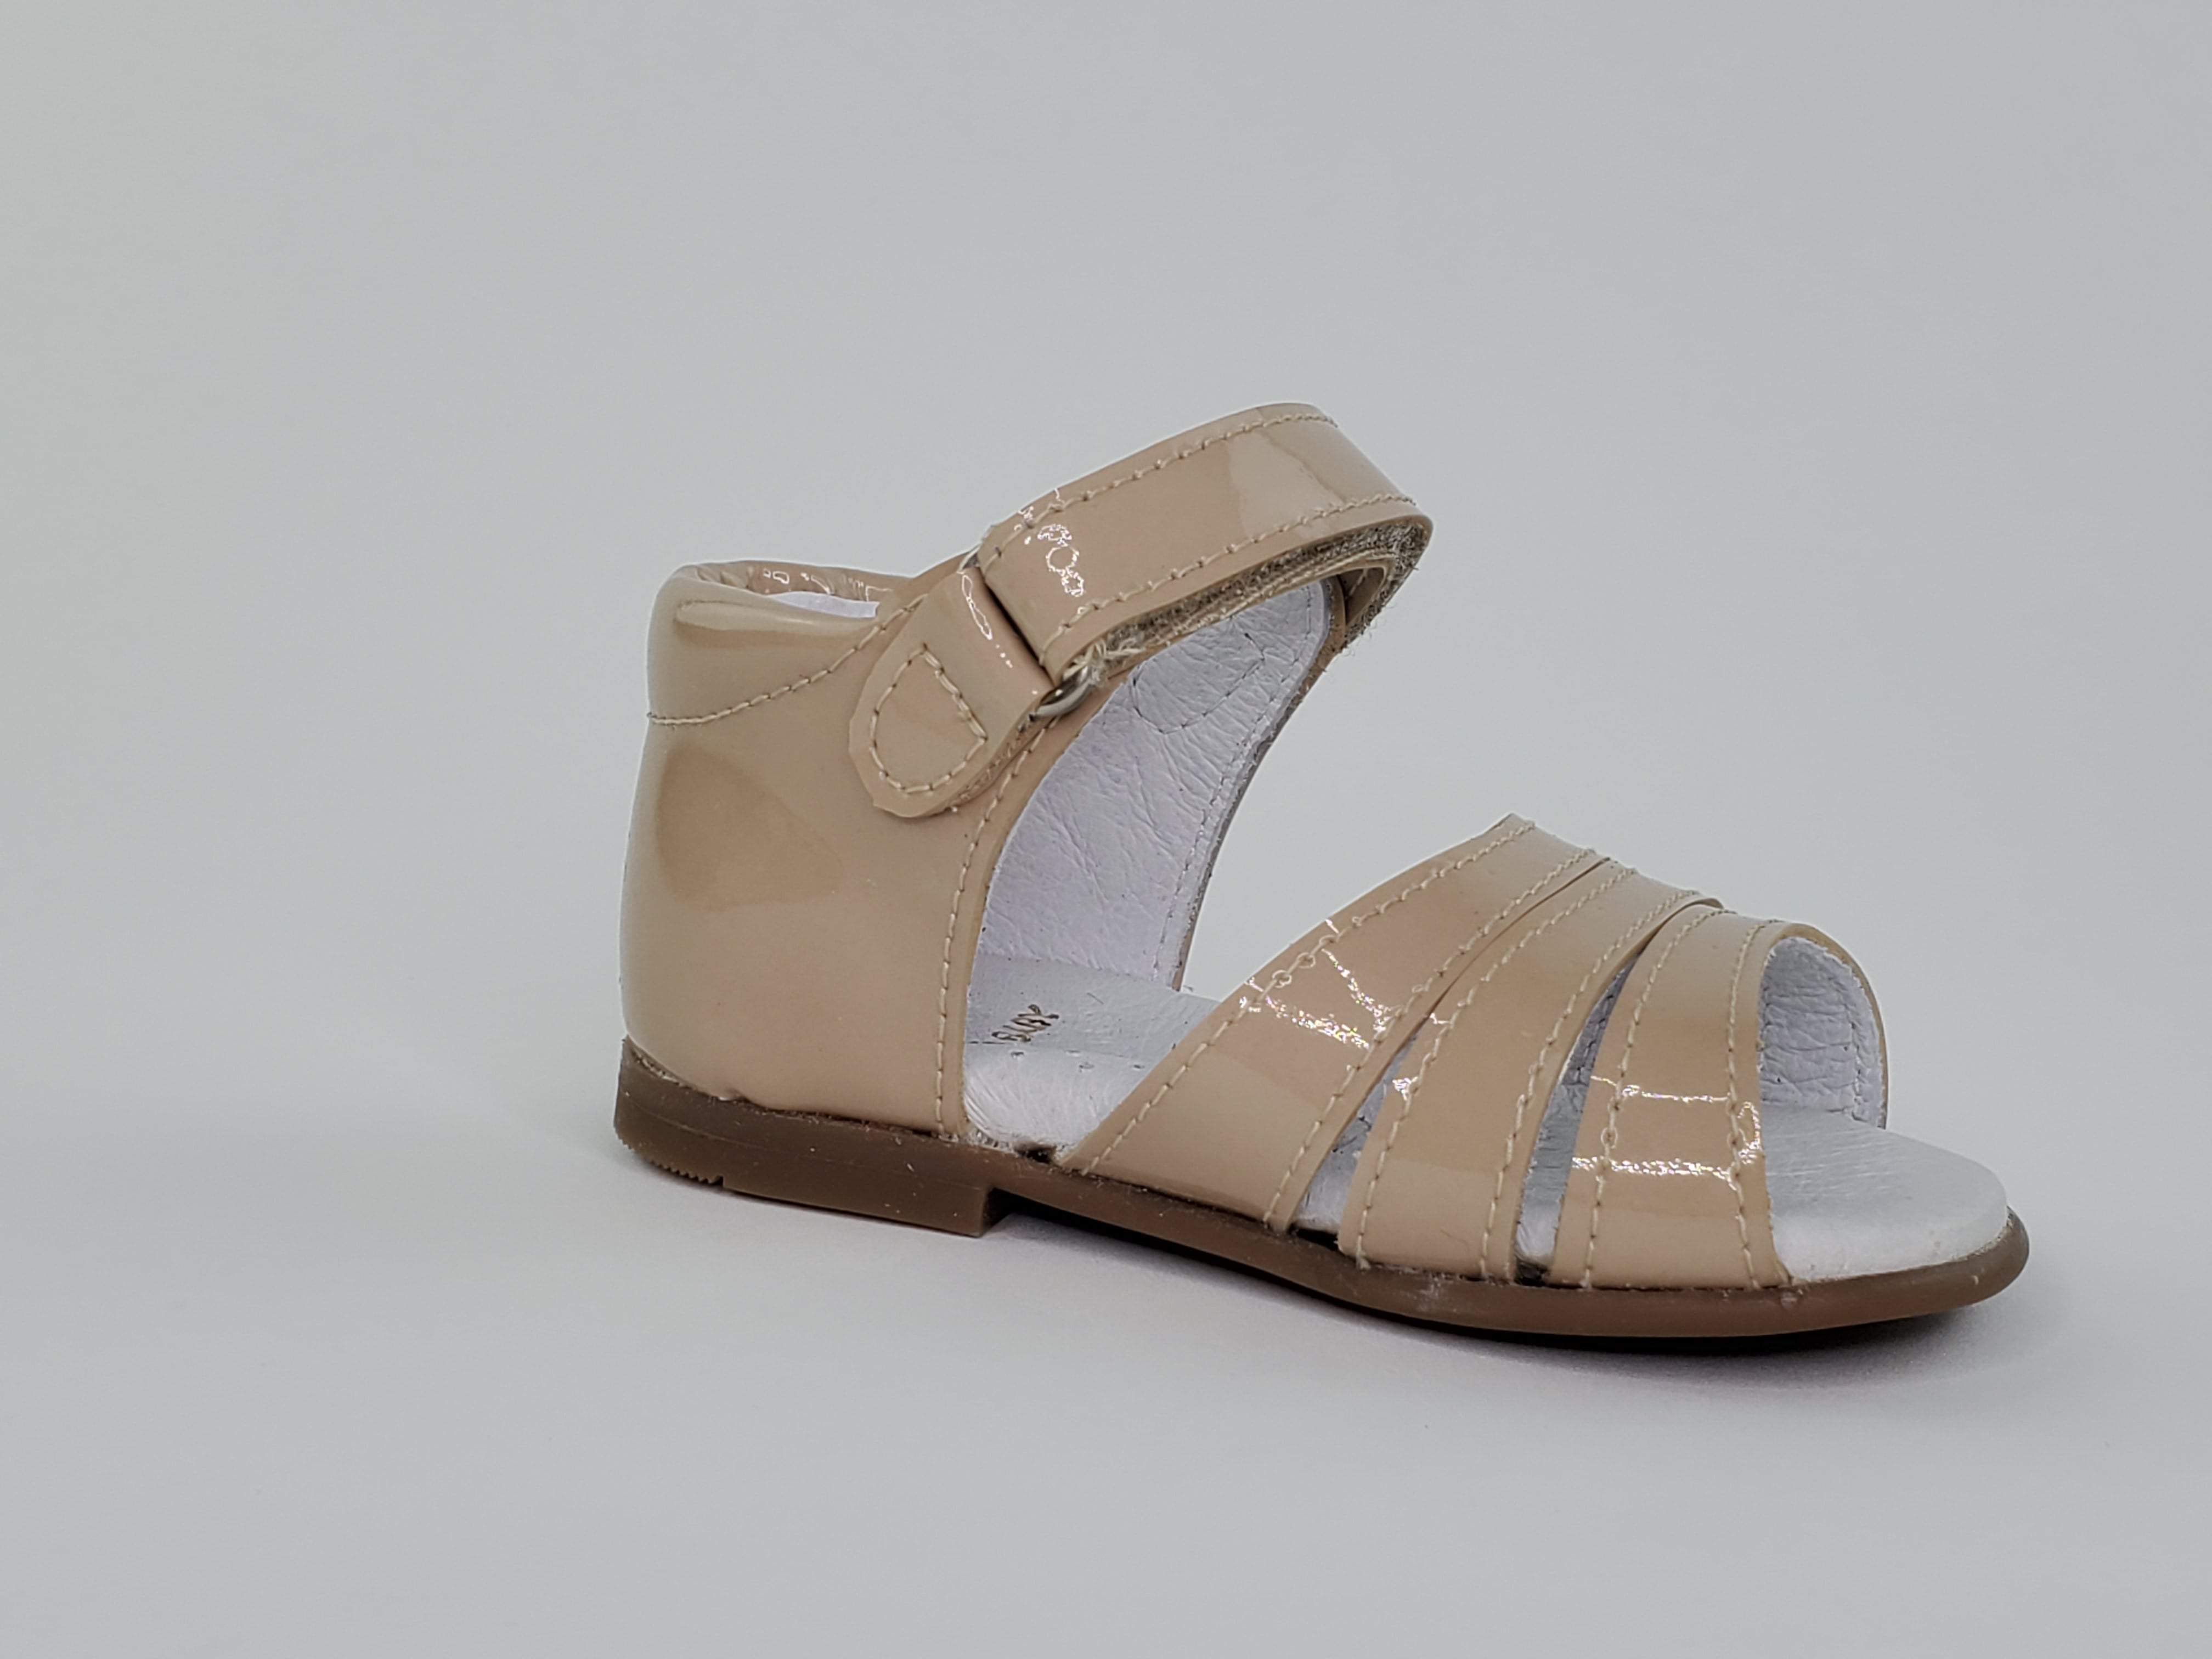 Beige Patent Leather Girl's Sandals-Girl's Shoes-Girl's Shoes Store Girls Sandals Alfa Baby Boutique 